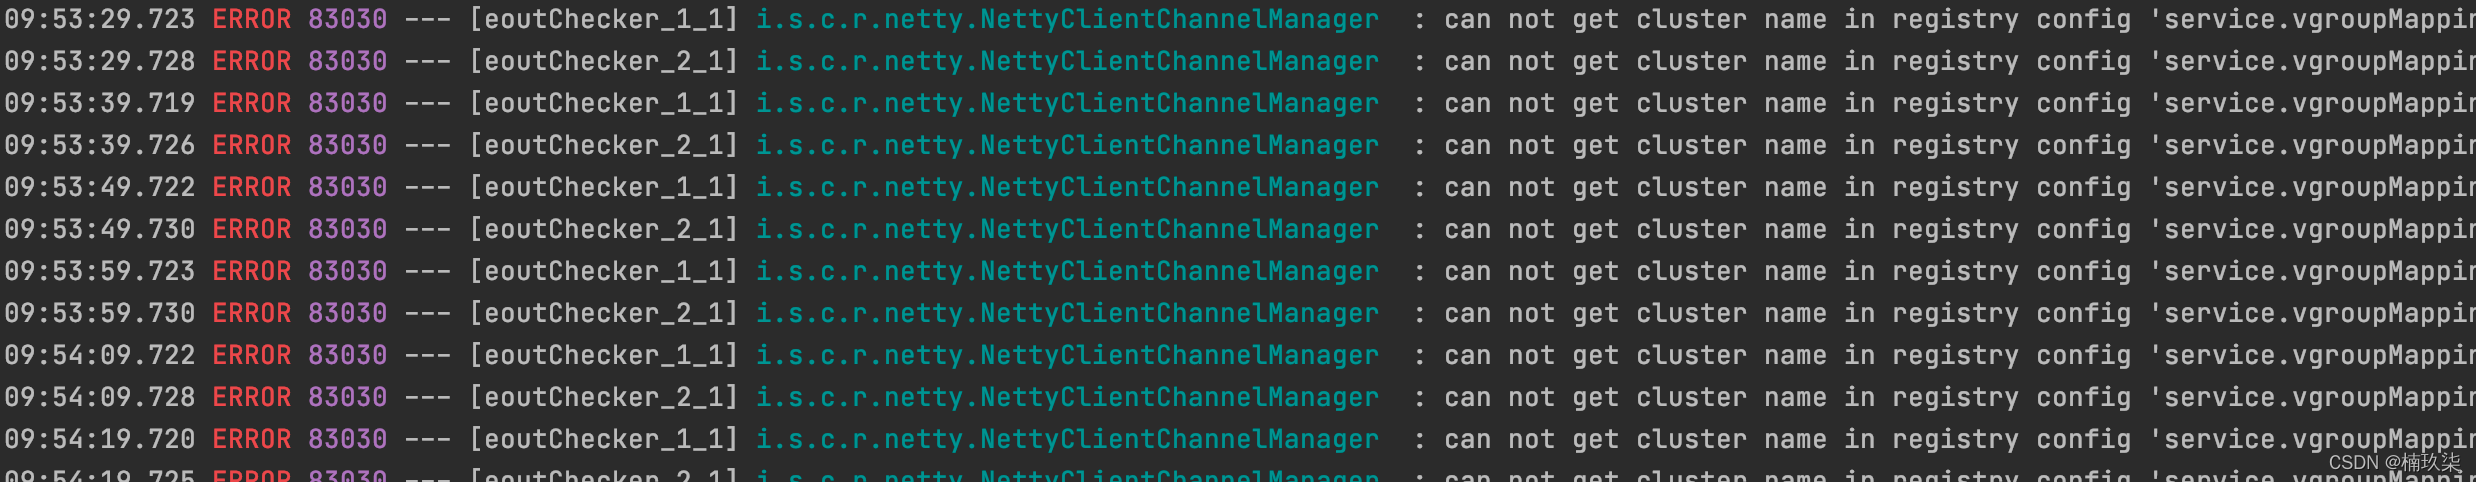 can not get cluster name in registry config ‘service.vgroupMapping.xx‘, please make sure registry